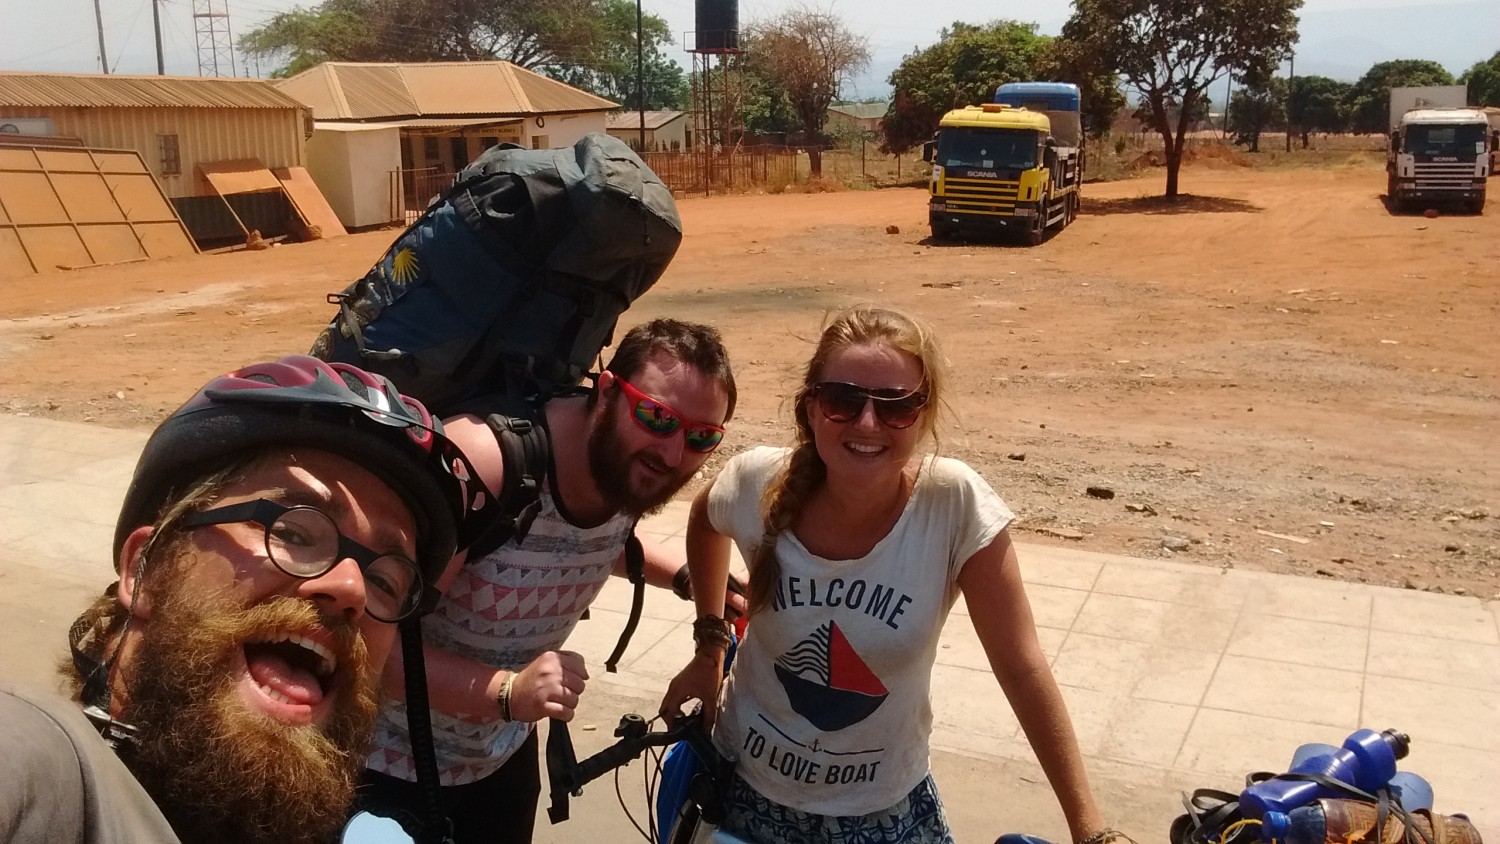 Crossing the border from Malawi to Zambia